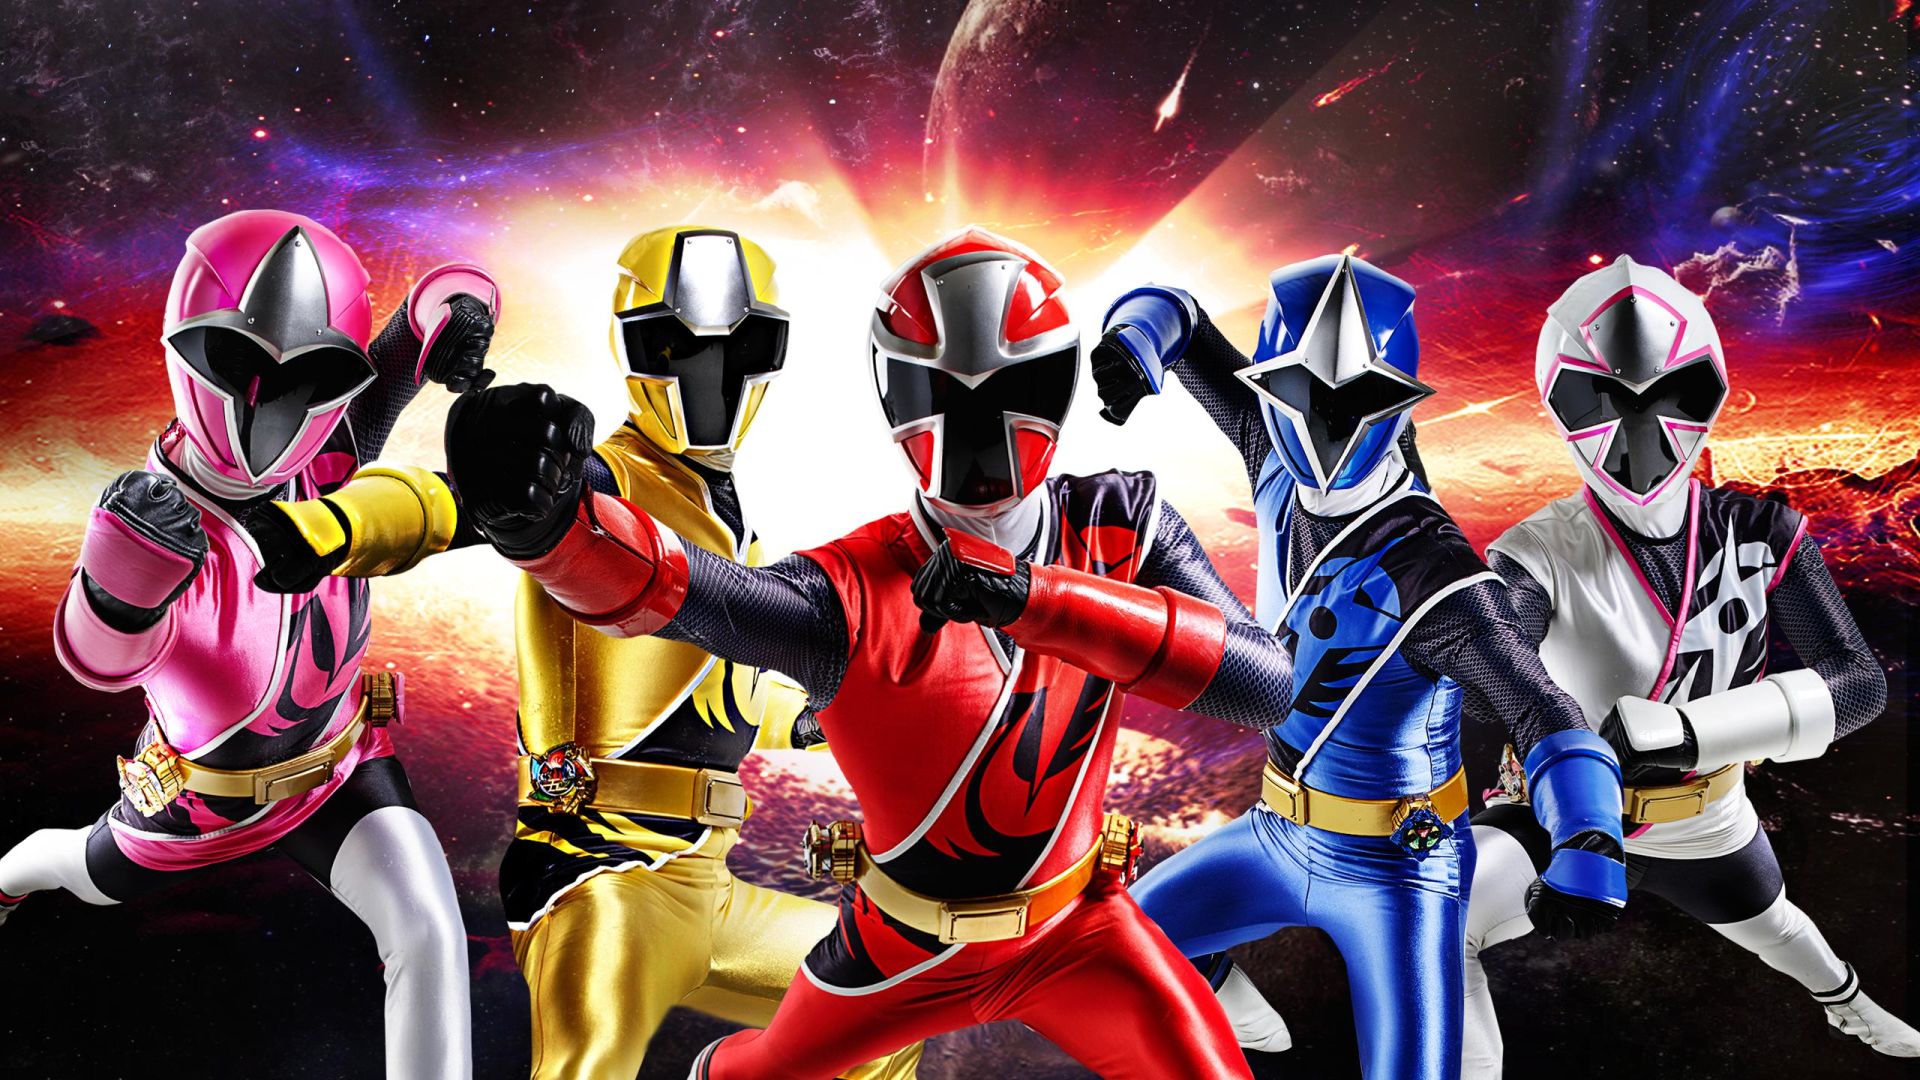 Unmasking 30 Years of Adventure: Why Today's National Power Rangers Day is a Big Deal